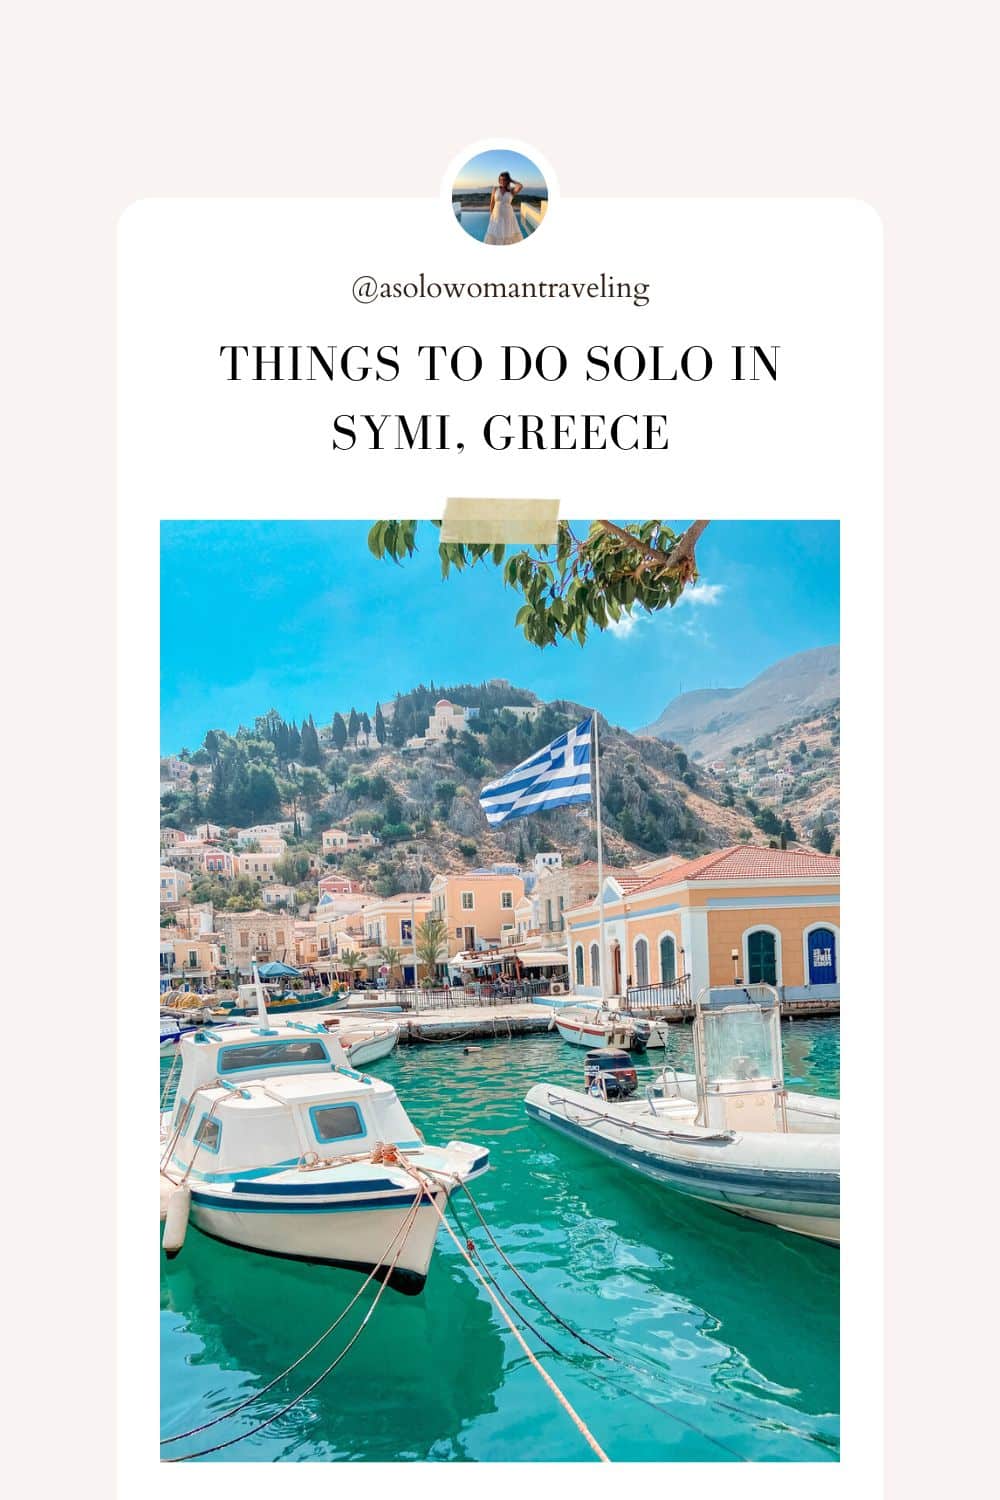 Things to do Solo in Symi